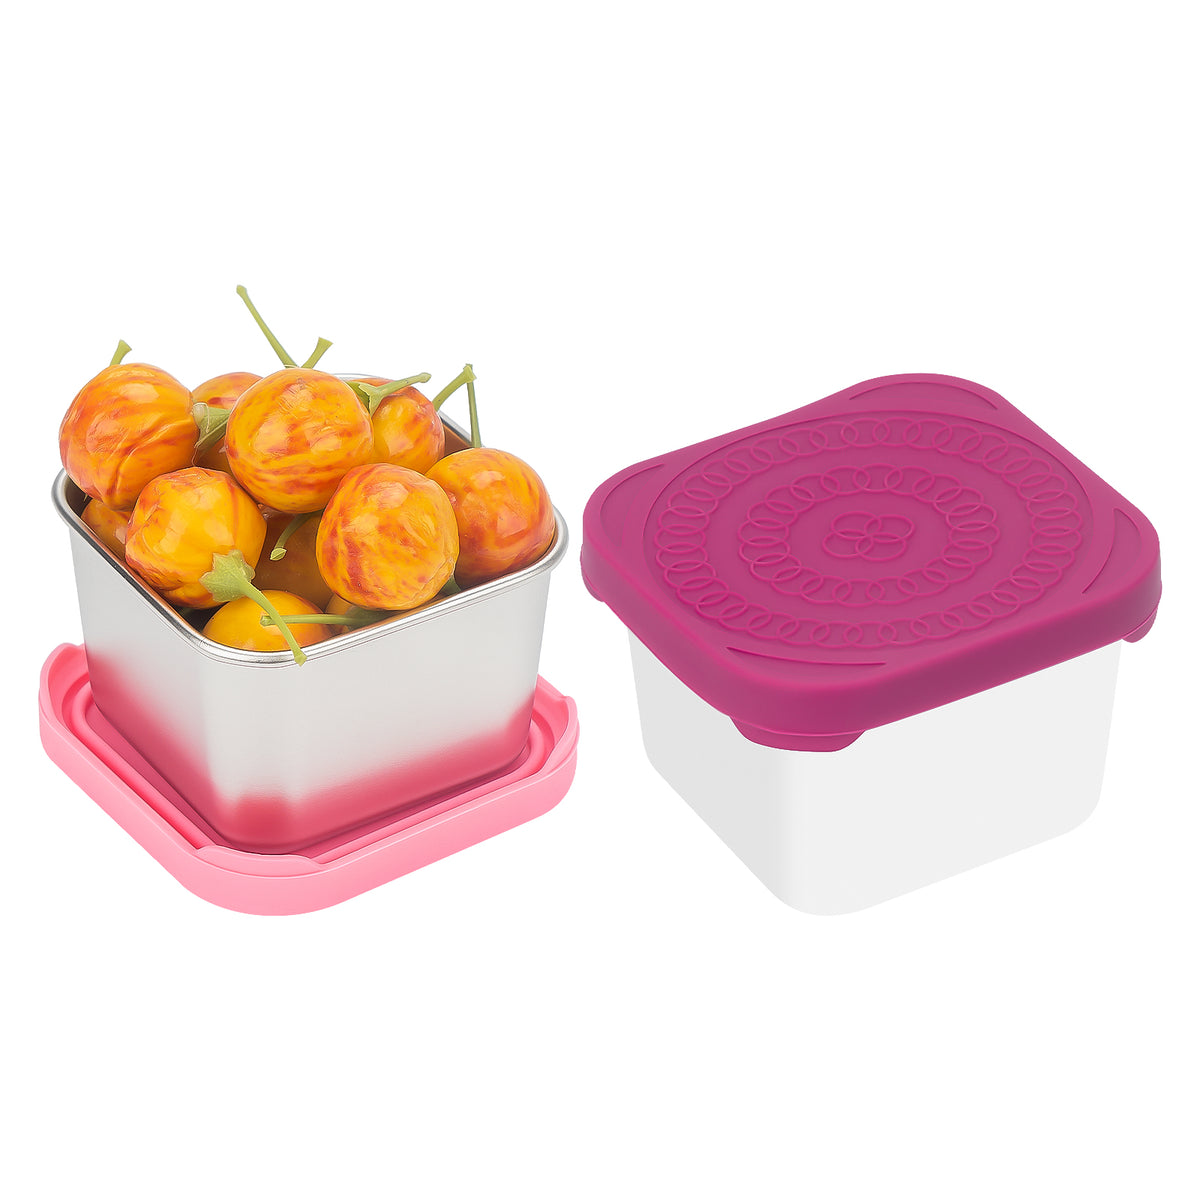 Adorila 2 Pack Stainless Steel Snack Containers, 6oz Leakproof Small Food Containers with Lids, Reusable Metal Lunch Box for Travel (Red & Pink)